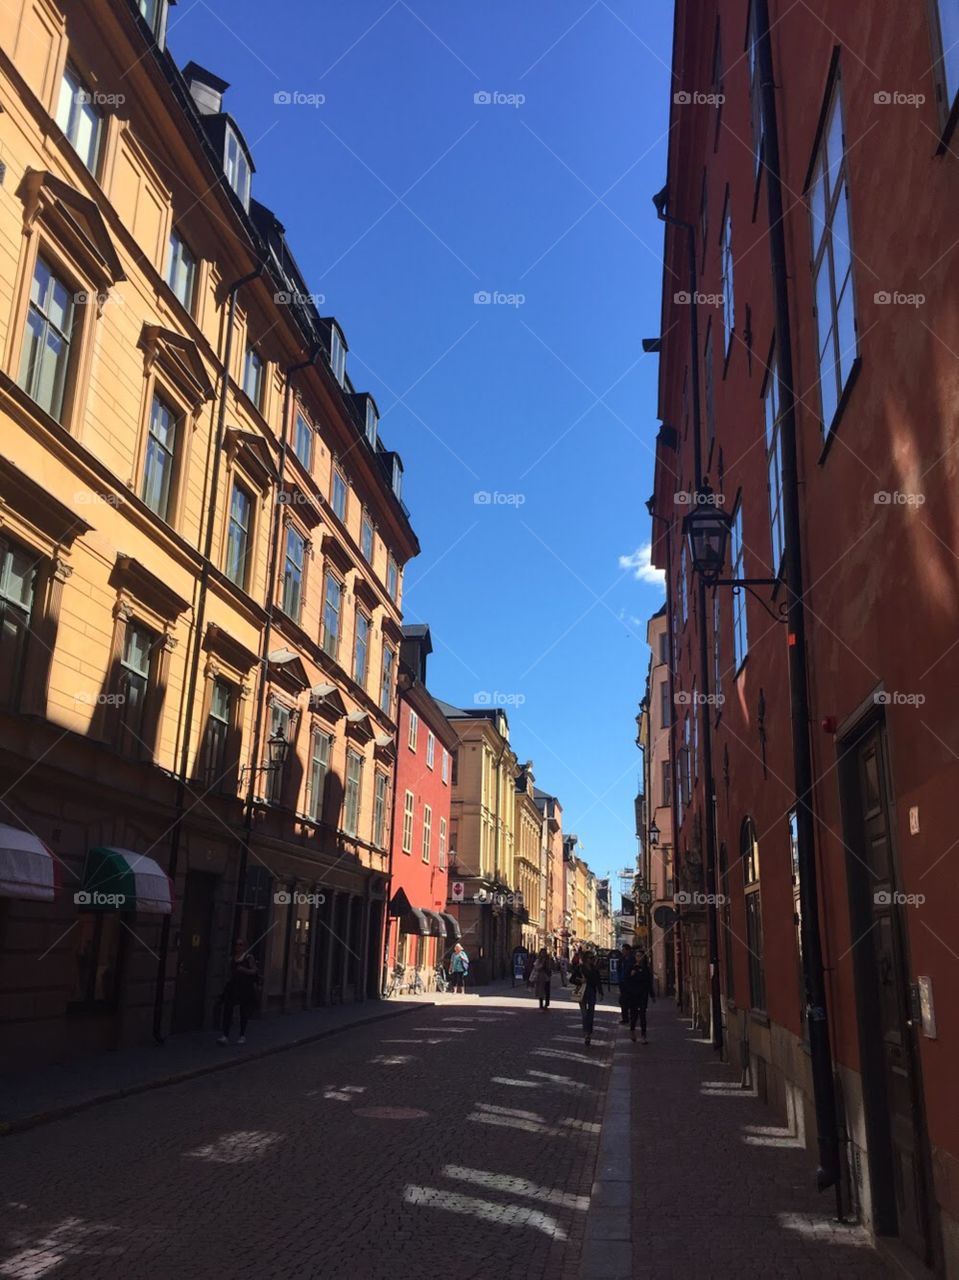 A narrow, Swedish street with tall, colorful buildings with many windows. 